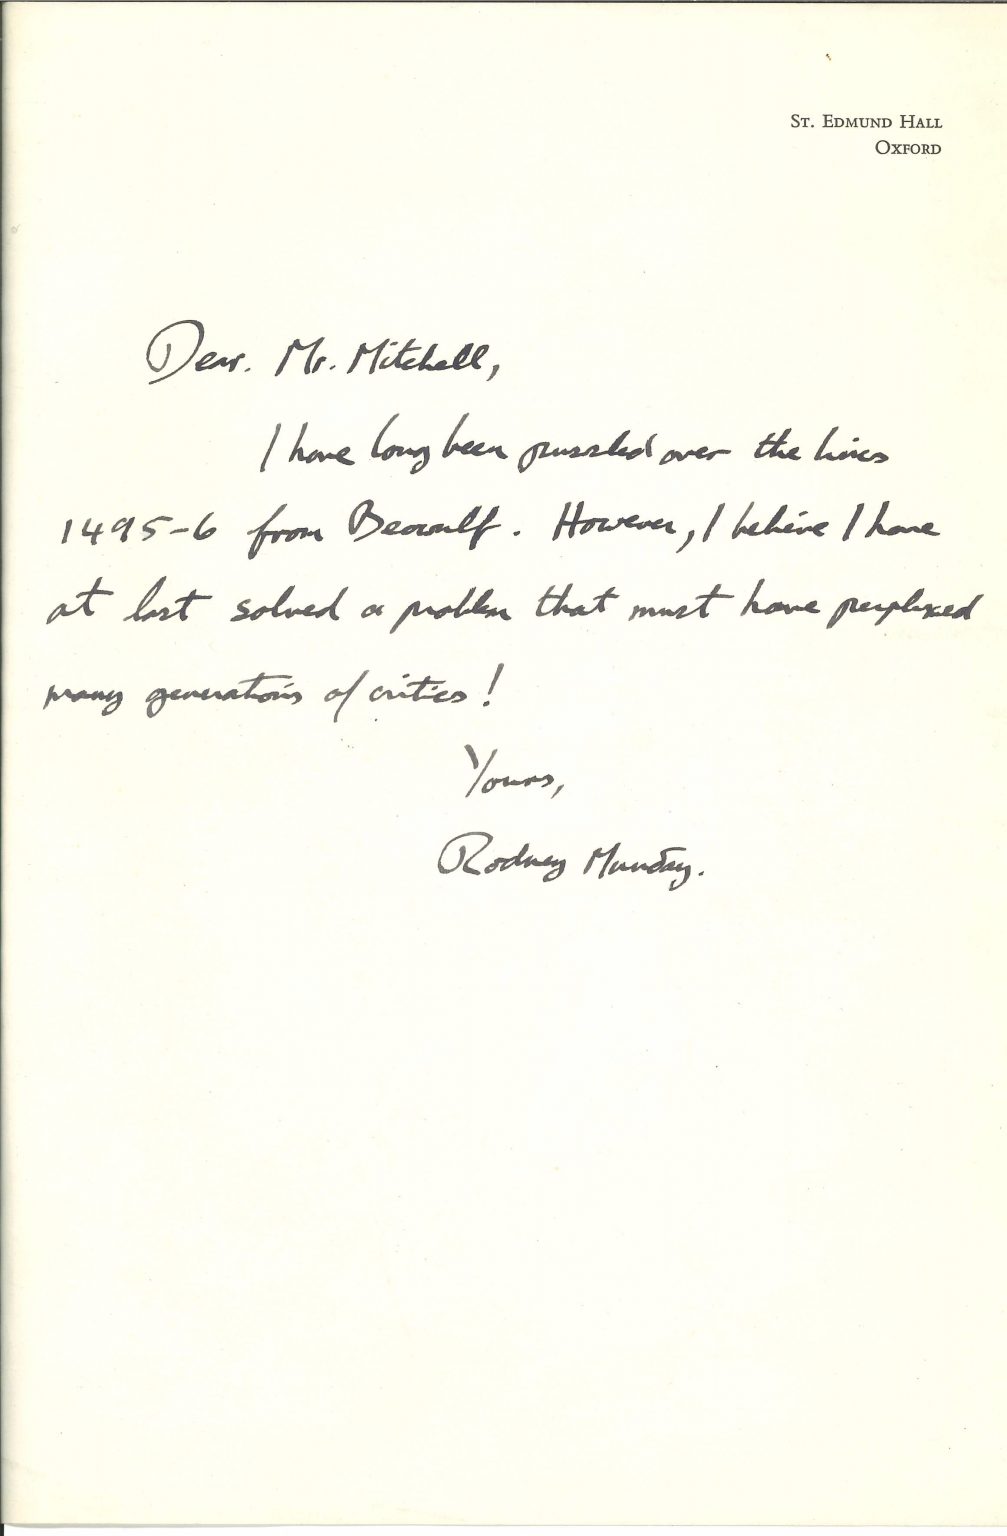 Letter from Rodney Munday to Bruce Mithcell